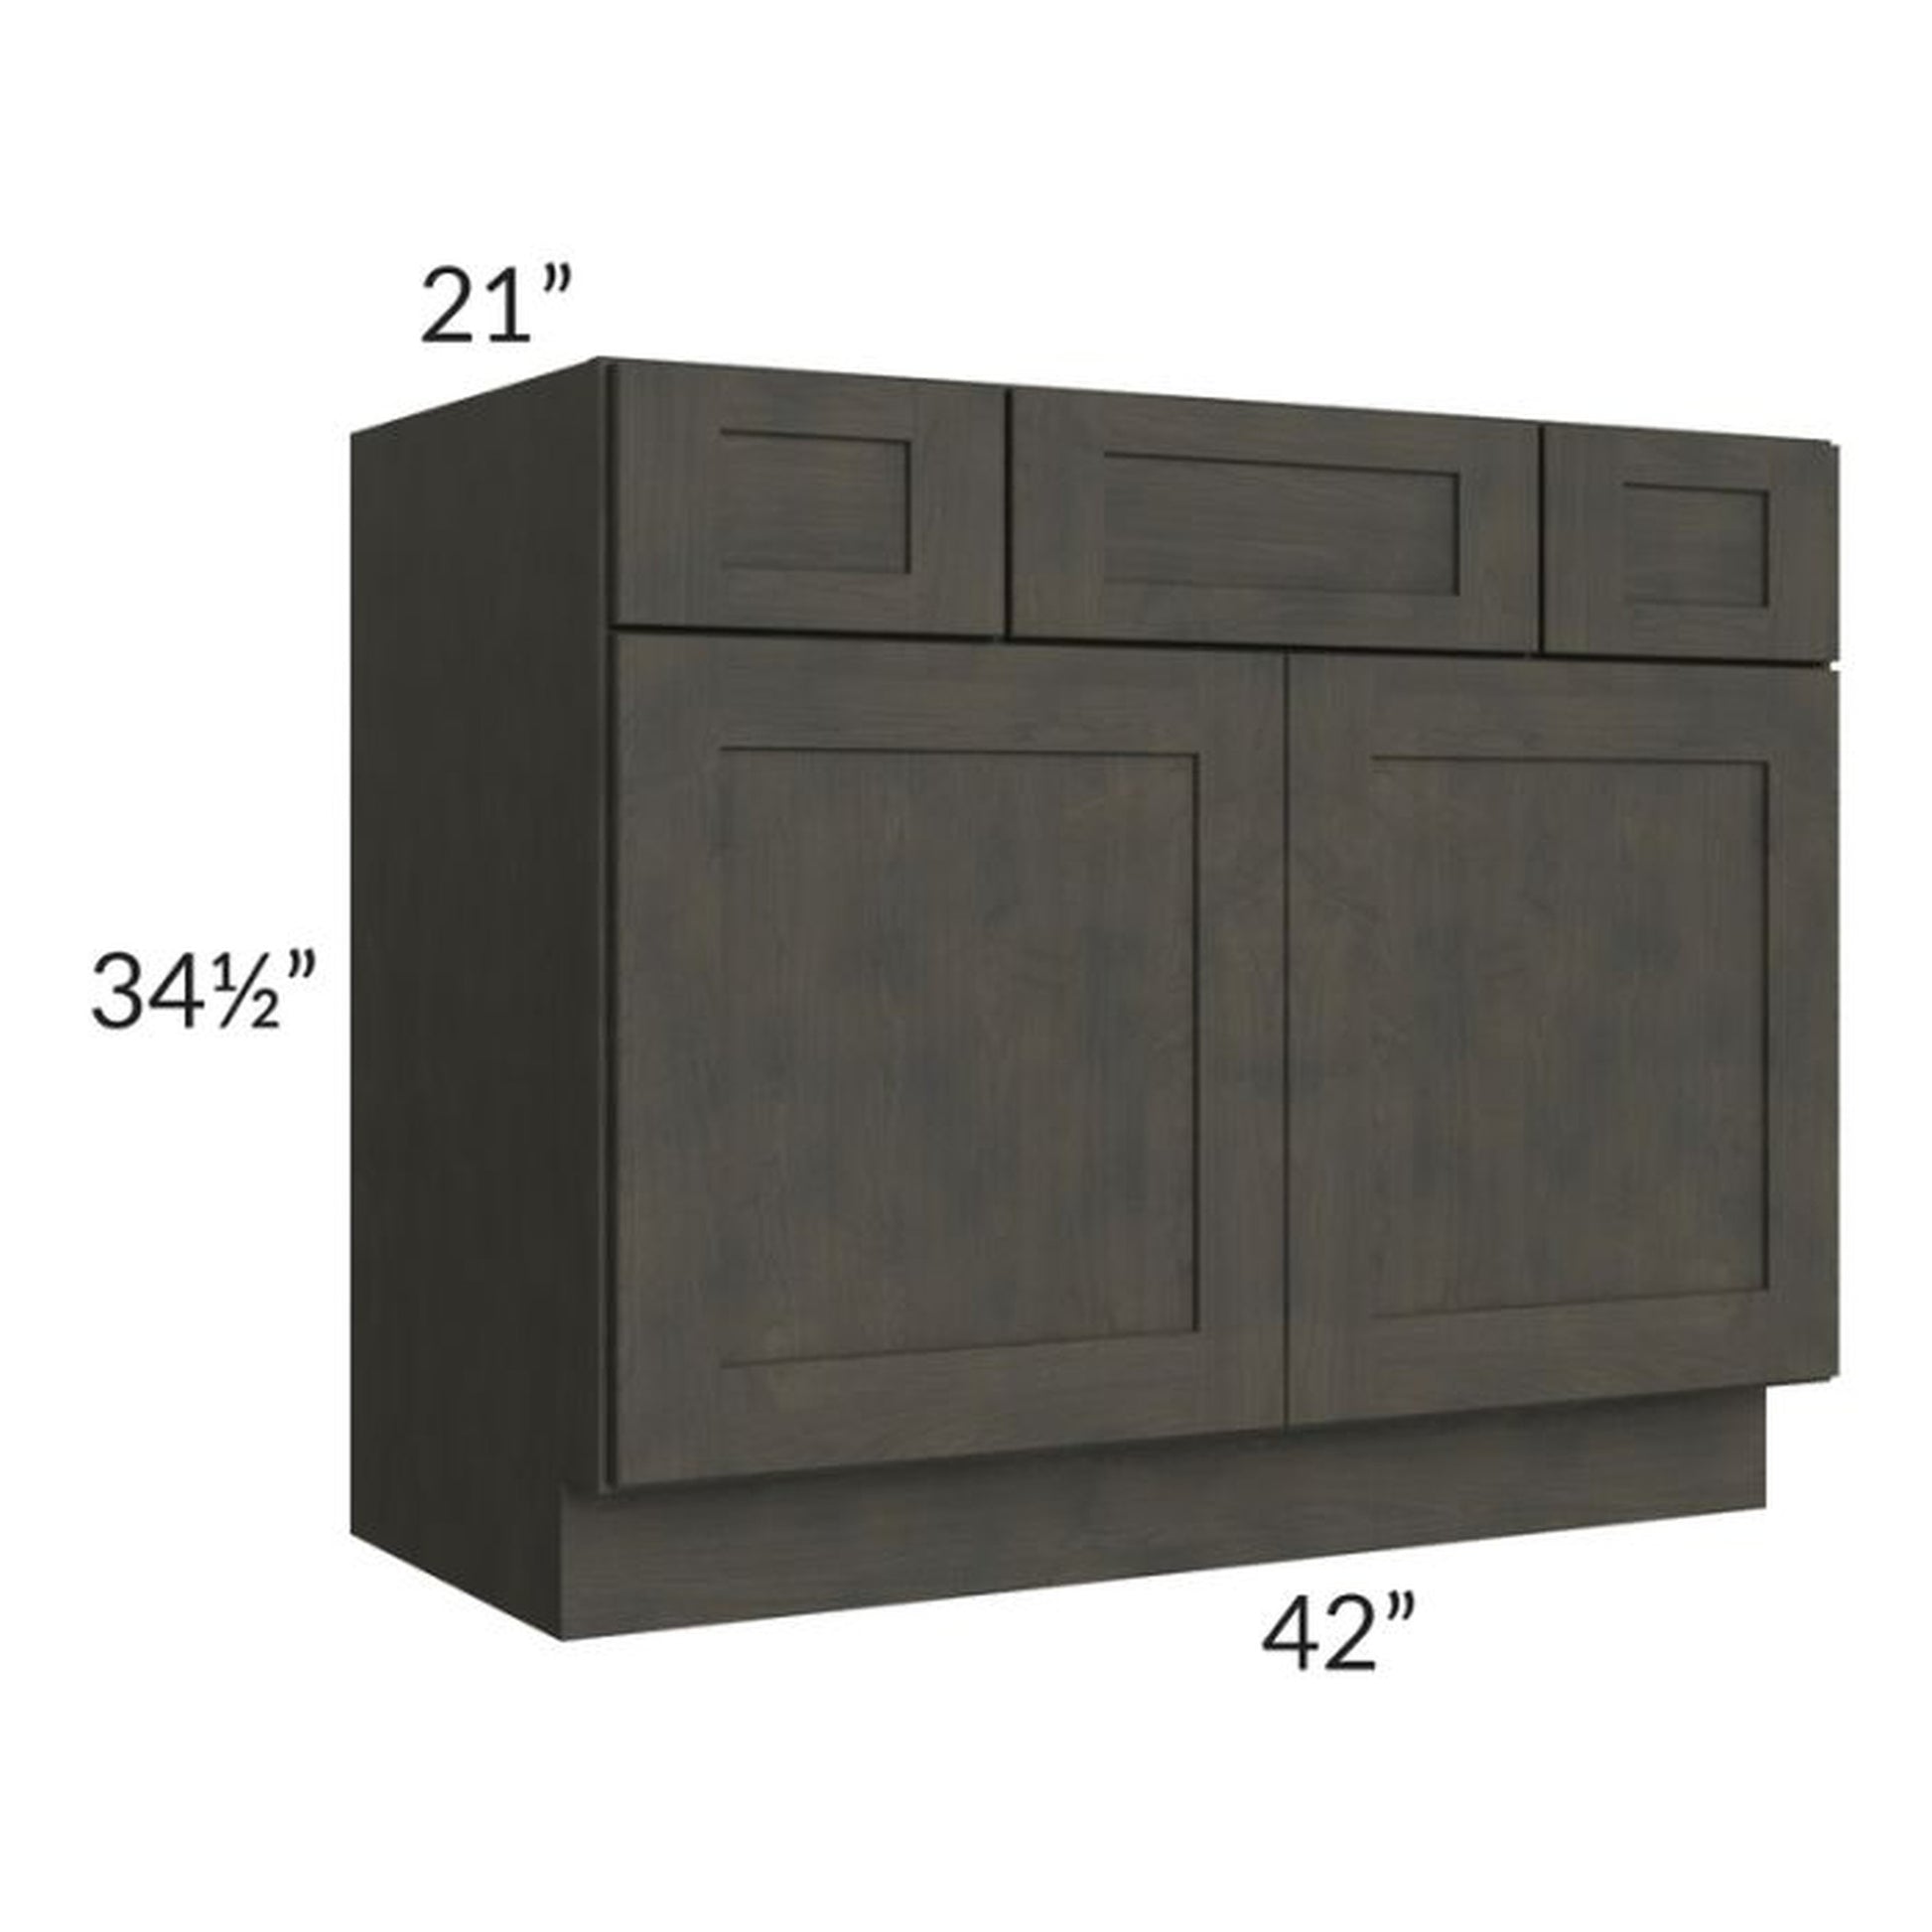 RTA Charcoal Grey Shaker 42" Vanity Base Cabinet with 1 Decorative End Panel